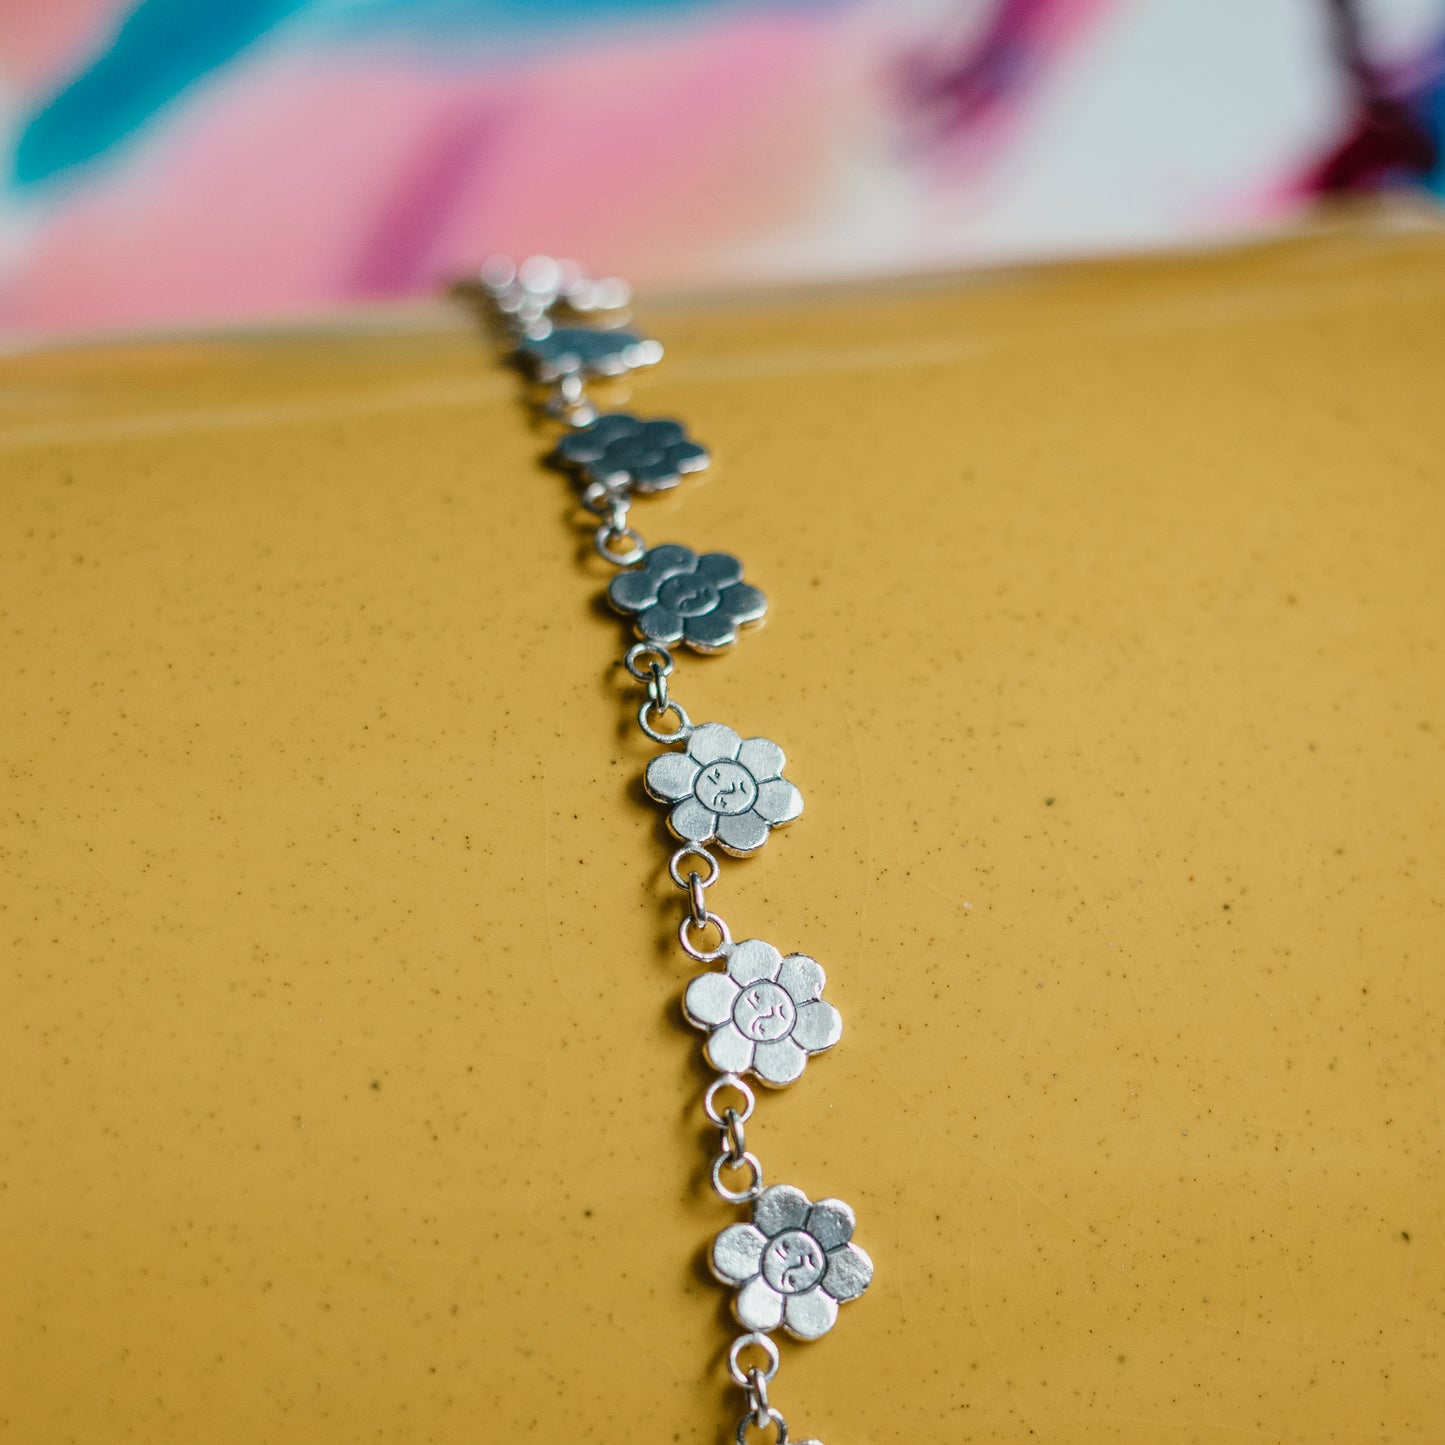 Grumpy Daisy Chain Necklace in Sterling Silver